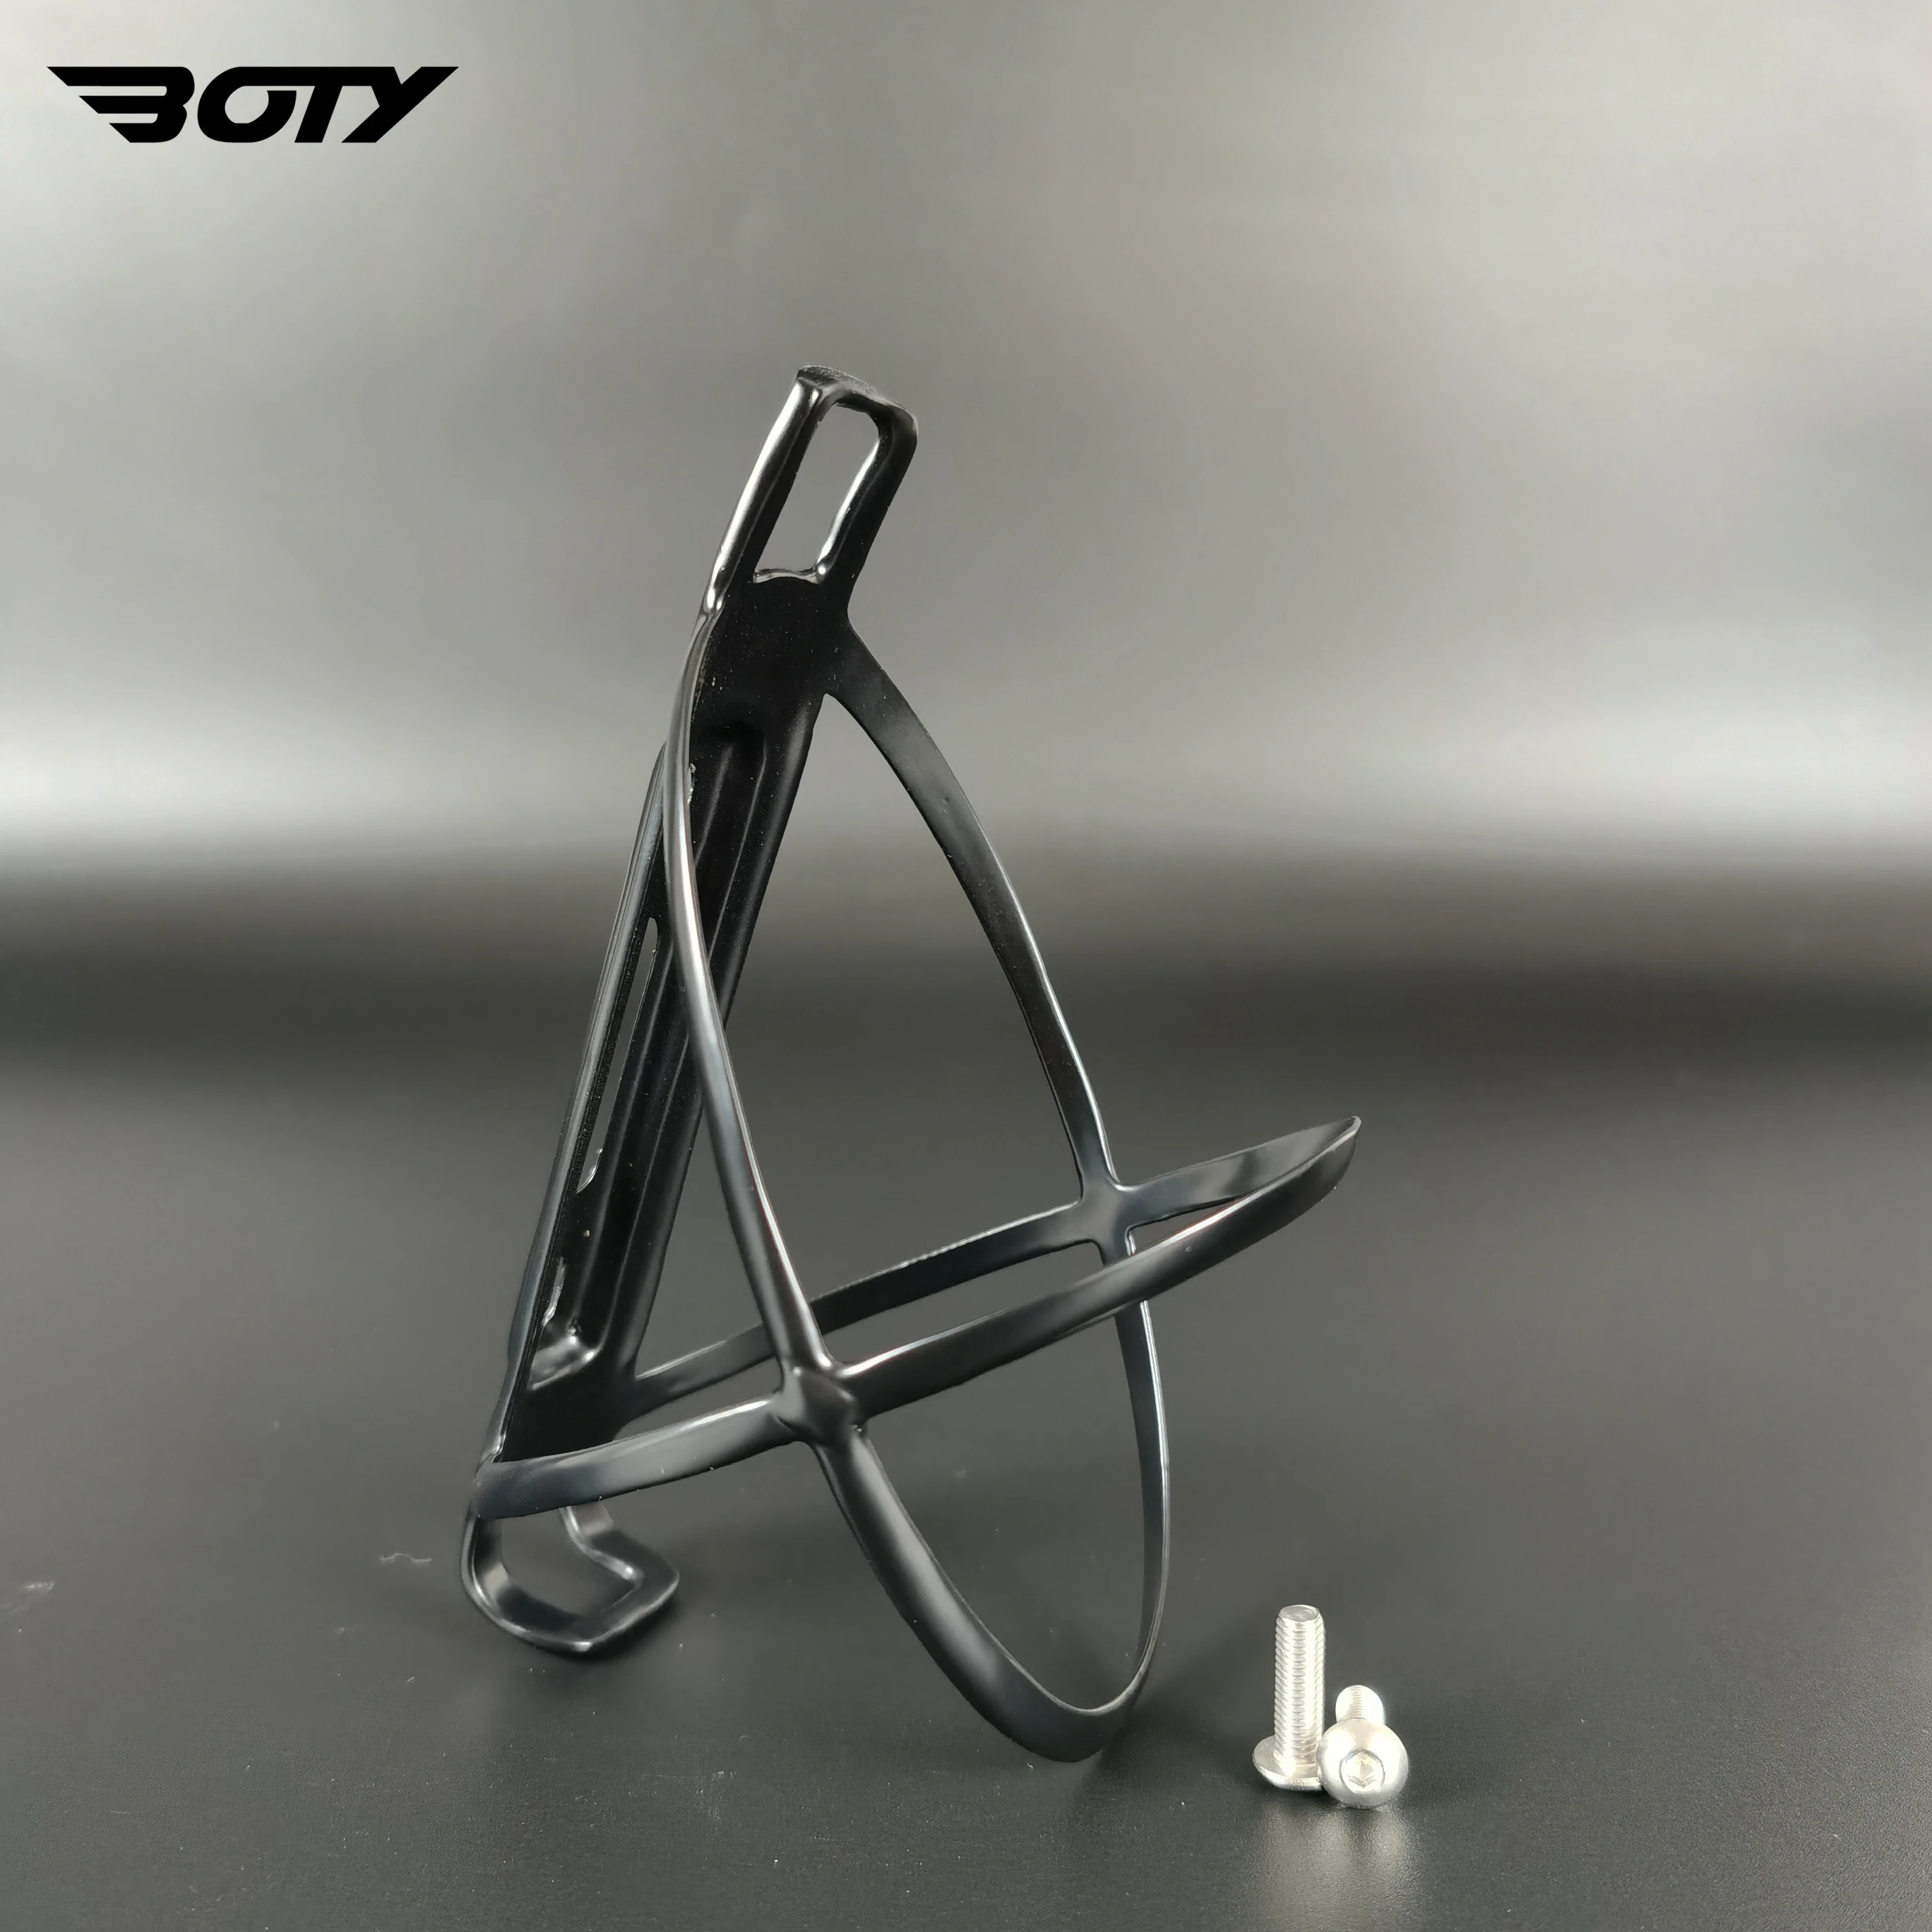 

15g! full carbon Fiber light weight Bottle Cages MTB/Road bike water bottle Holder UD glossy finish with screws